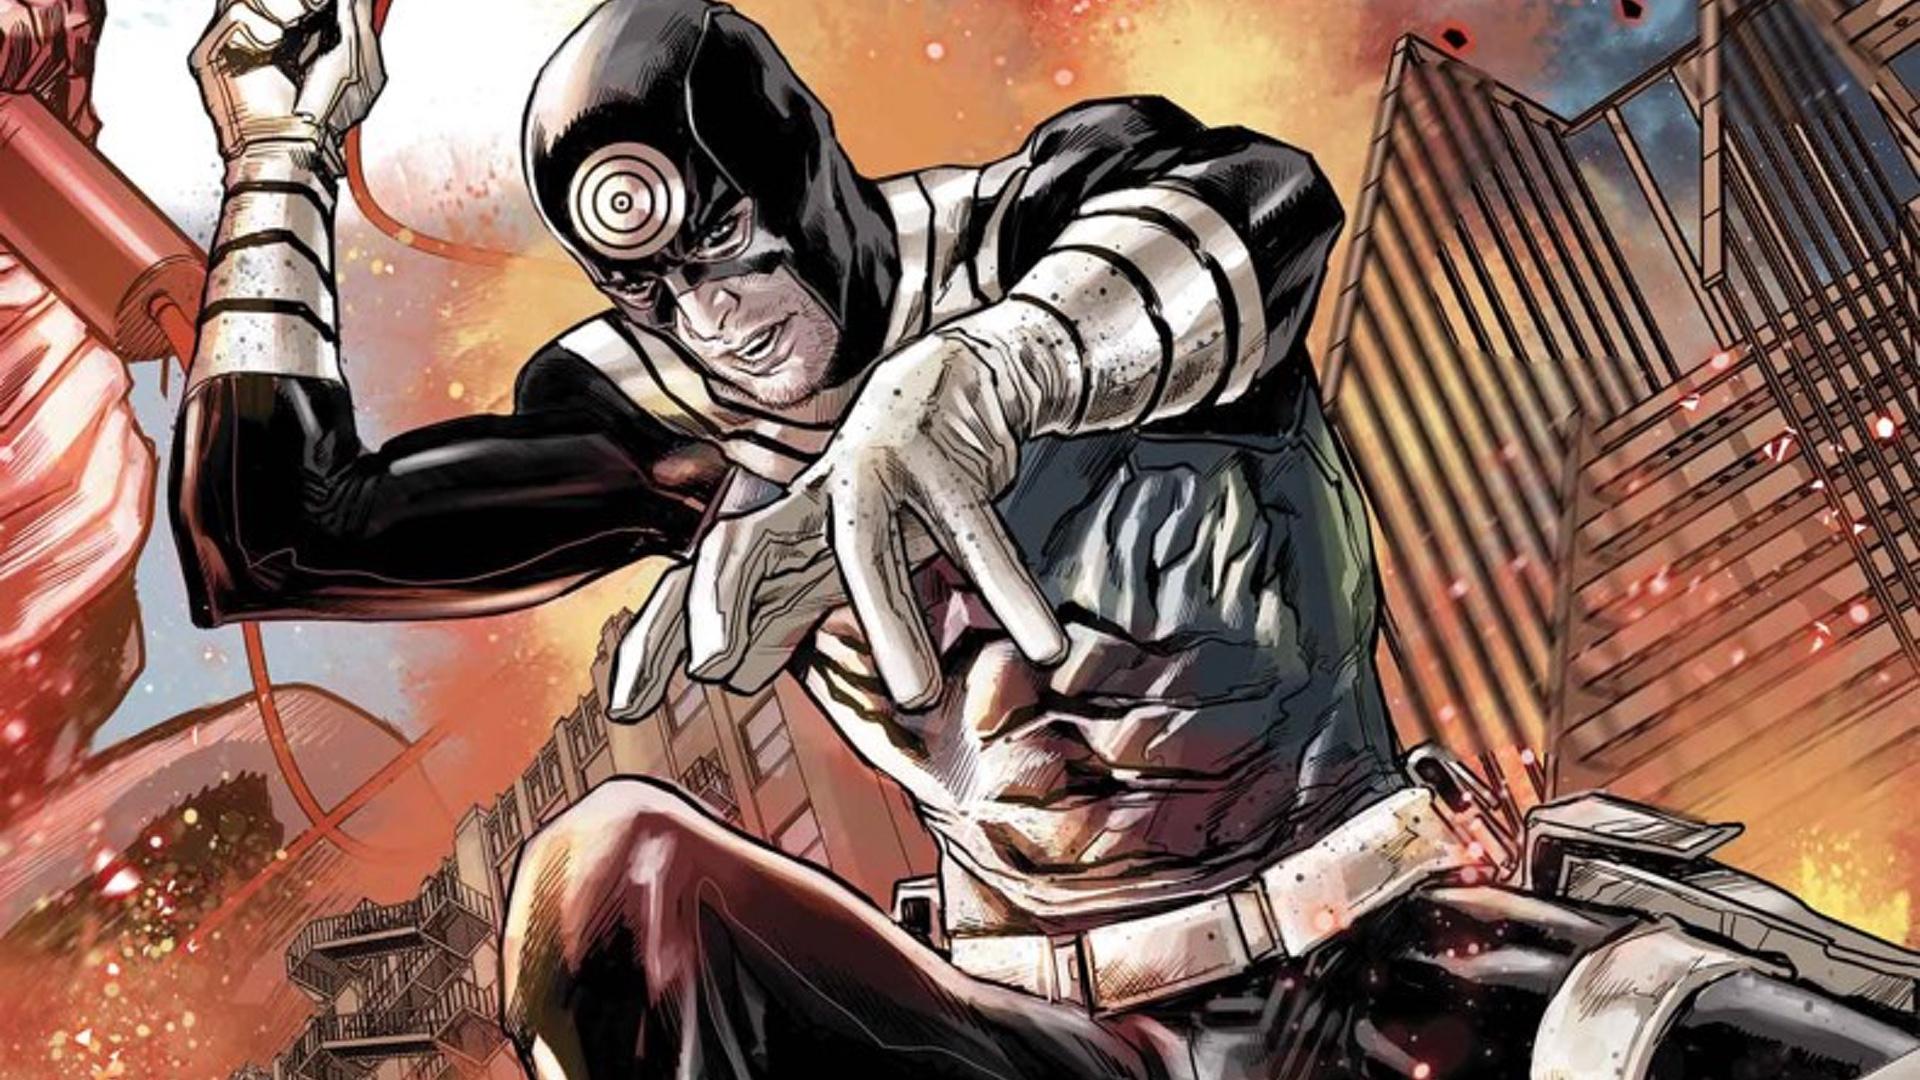 Bullseye is Coming to DAREDEVIL Season 3 and He Will Be Played